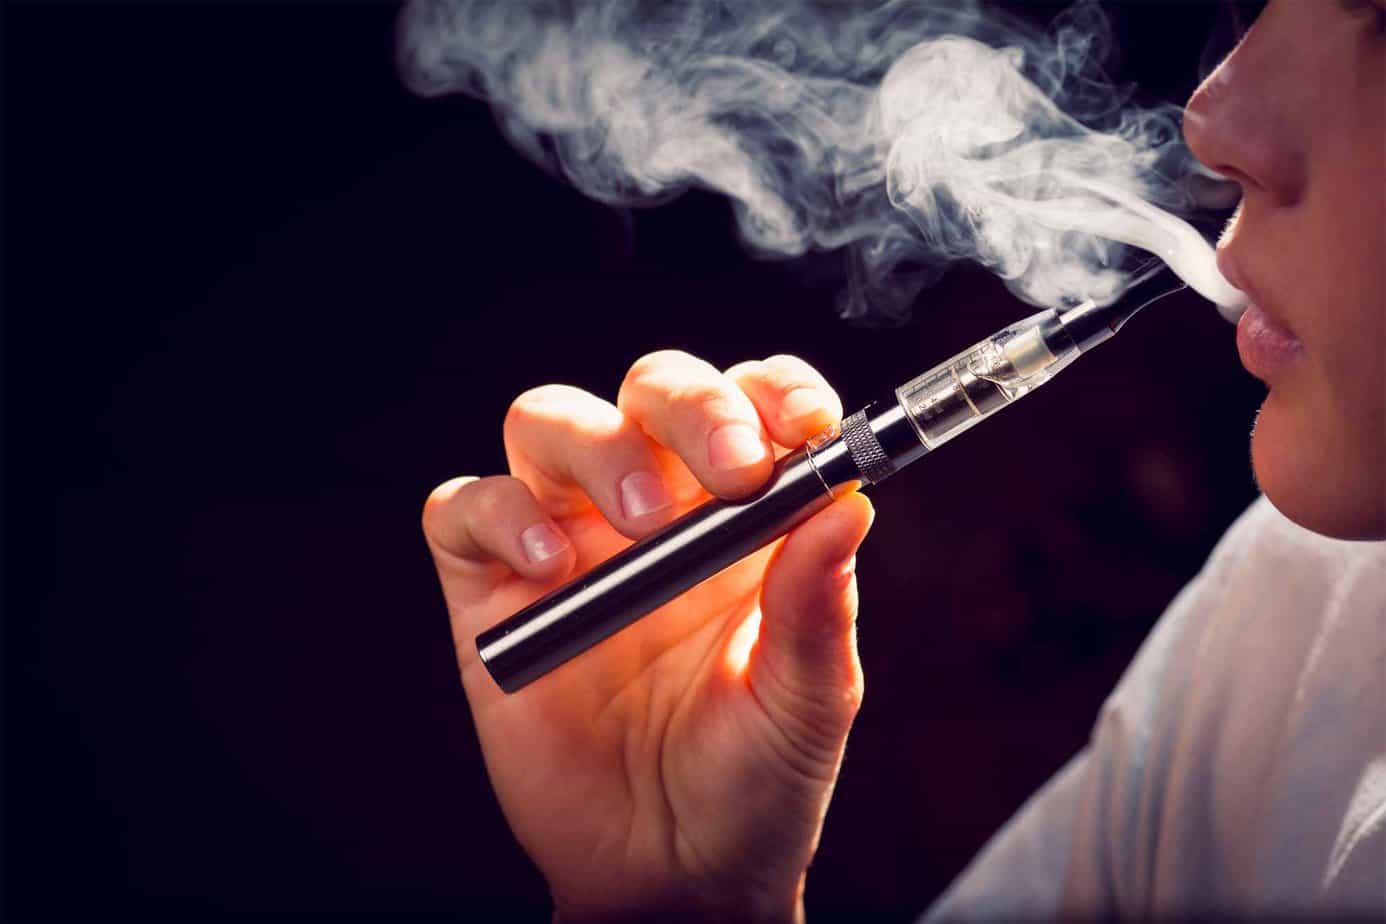 Is Vaping Really Safer?